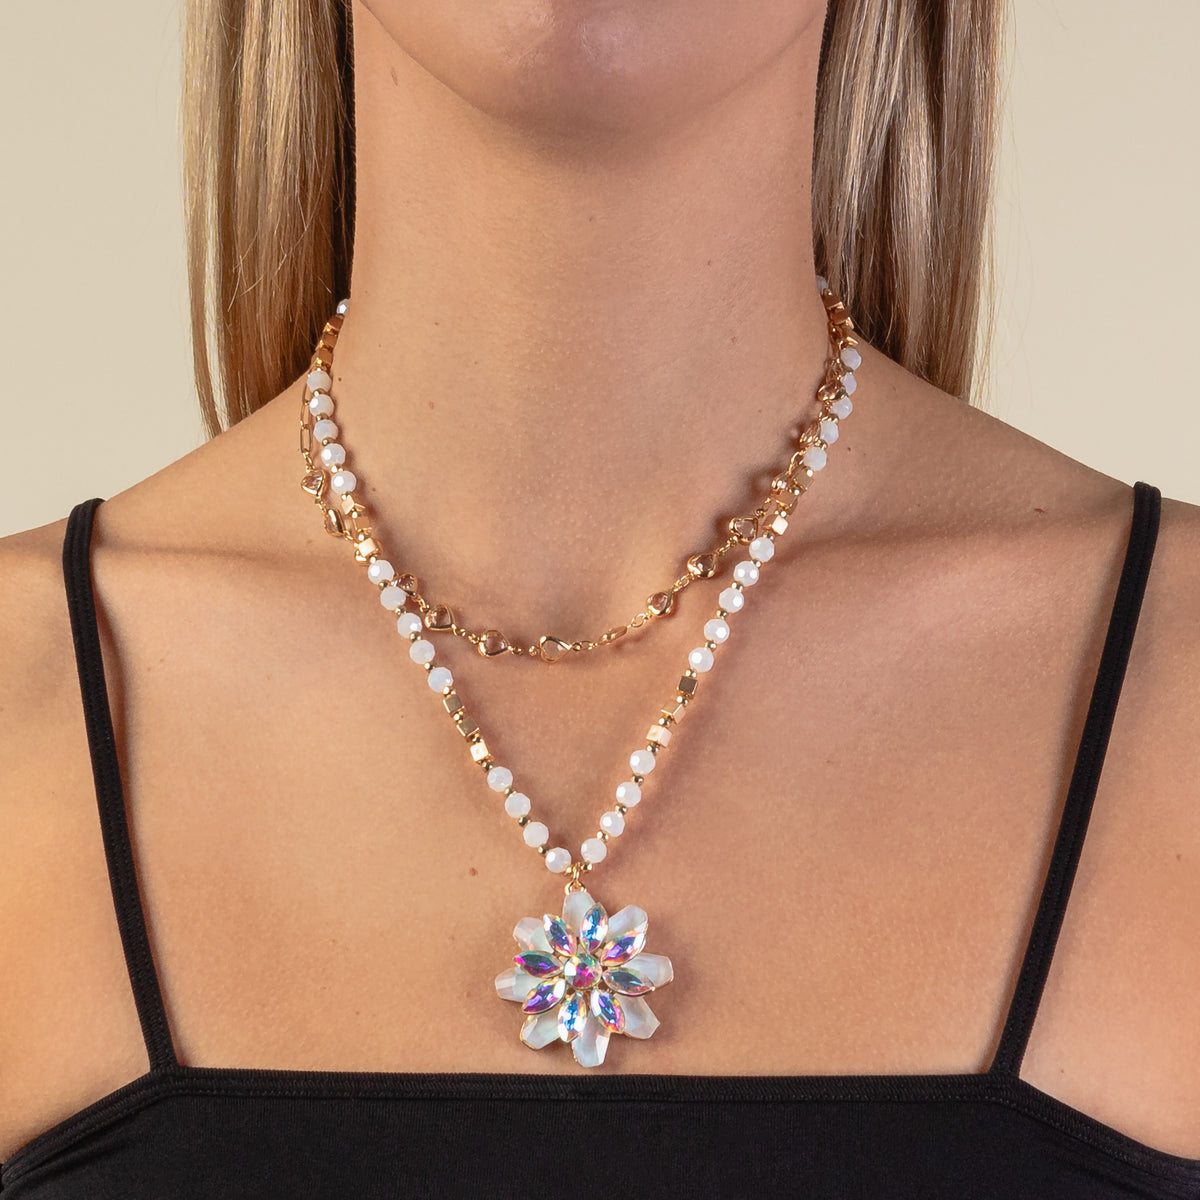 1218 - Crystal Flower Pendant Necklace - White